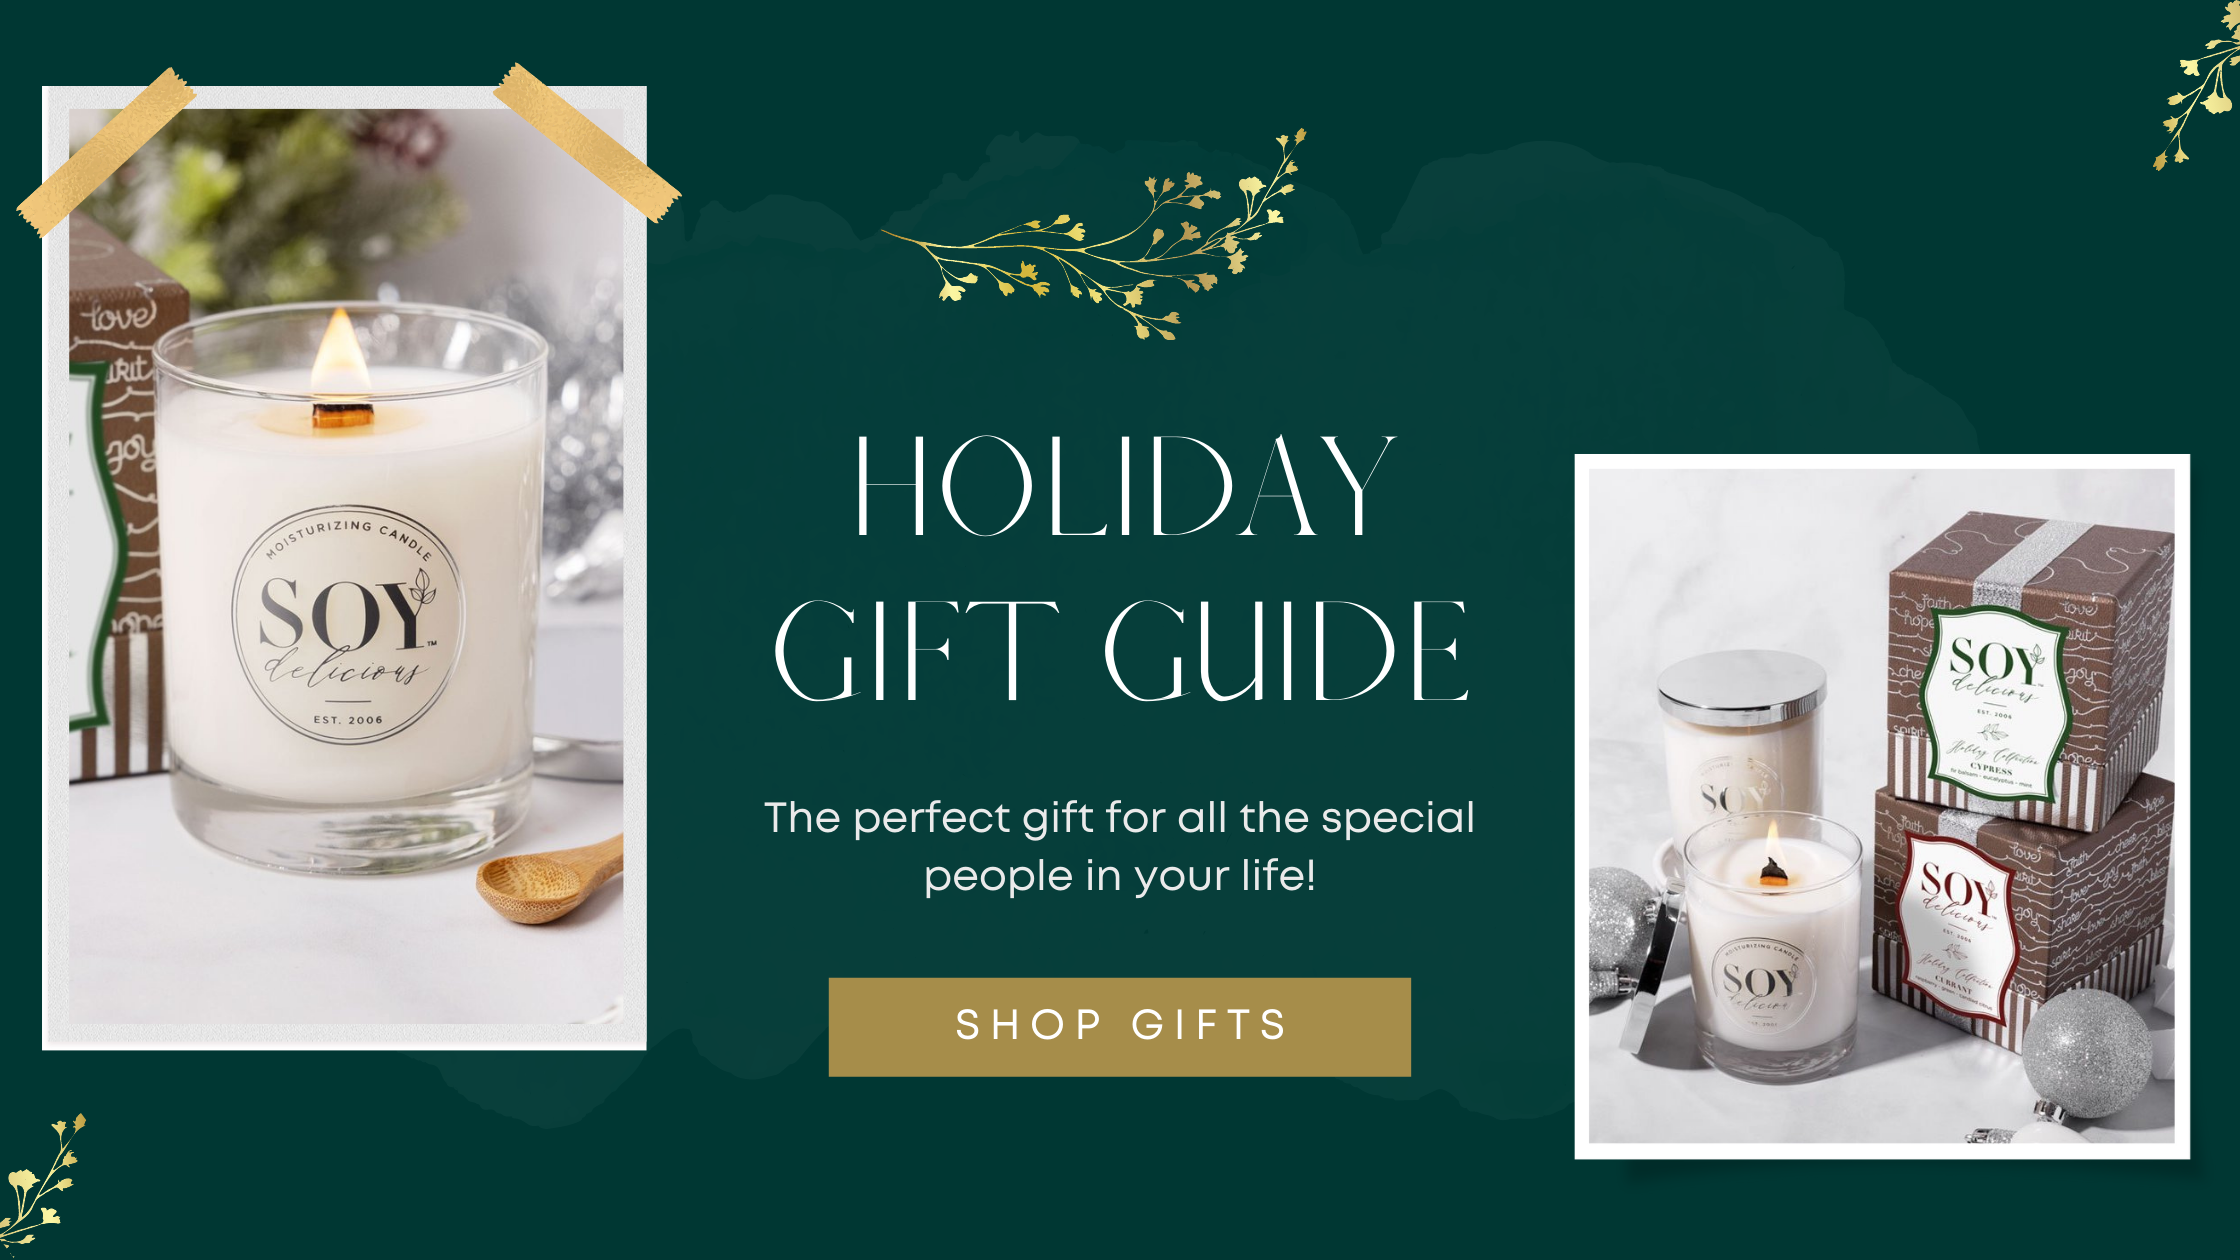 2021 Soy Delicious Holiday Gift Guide